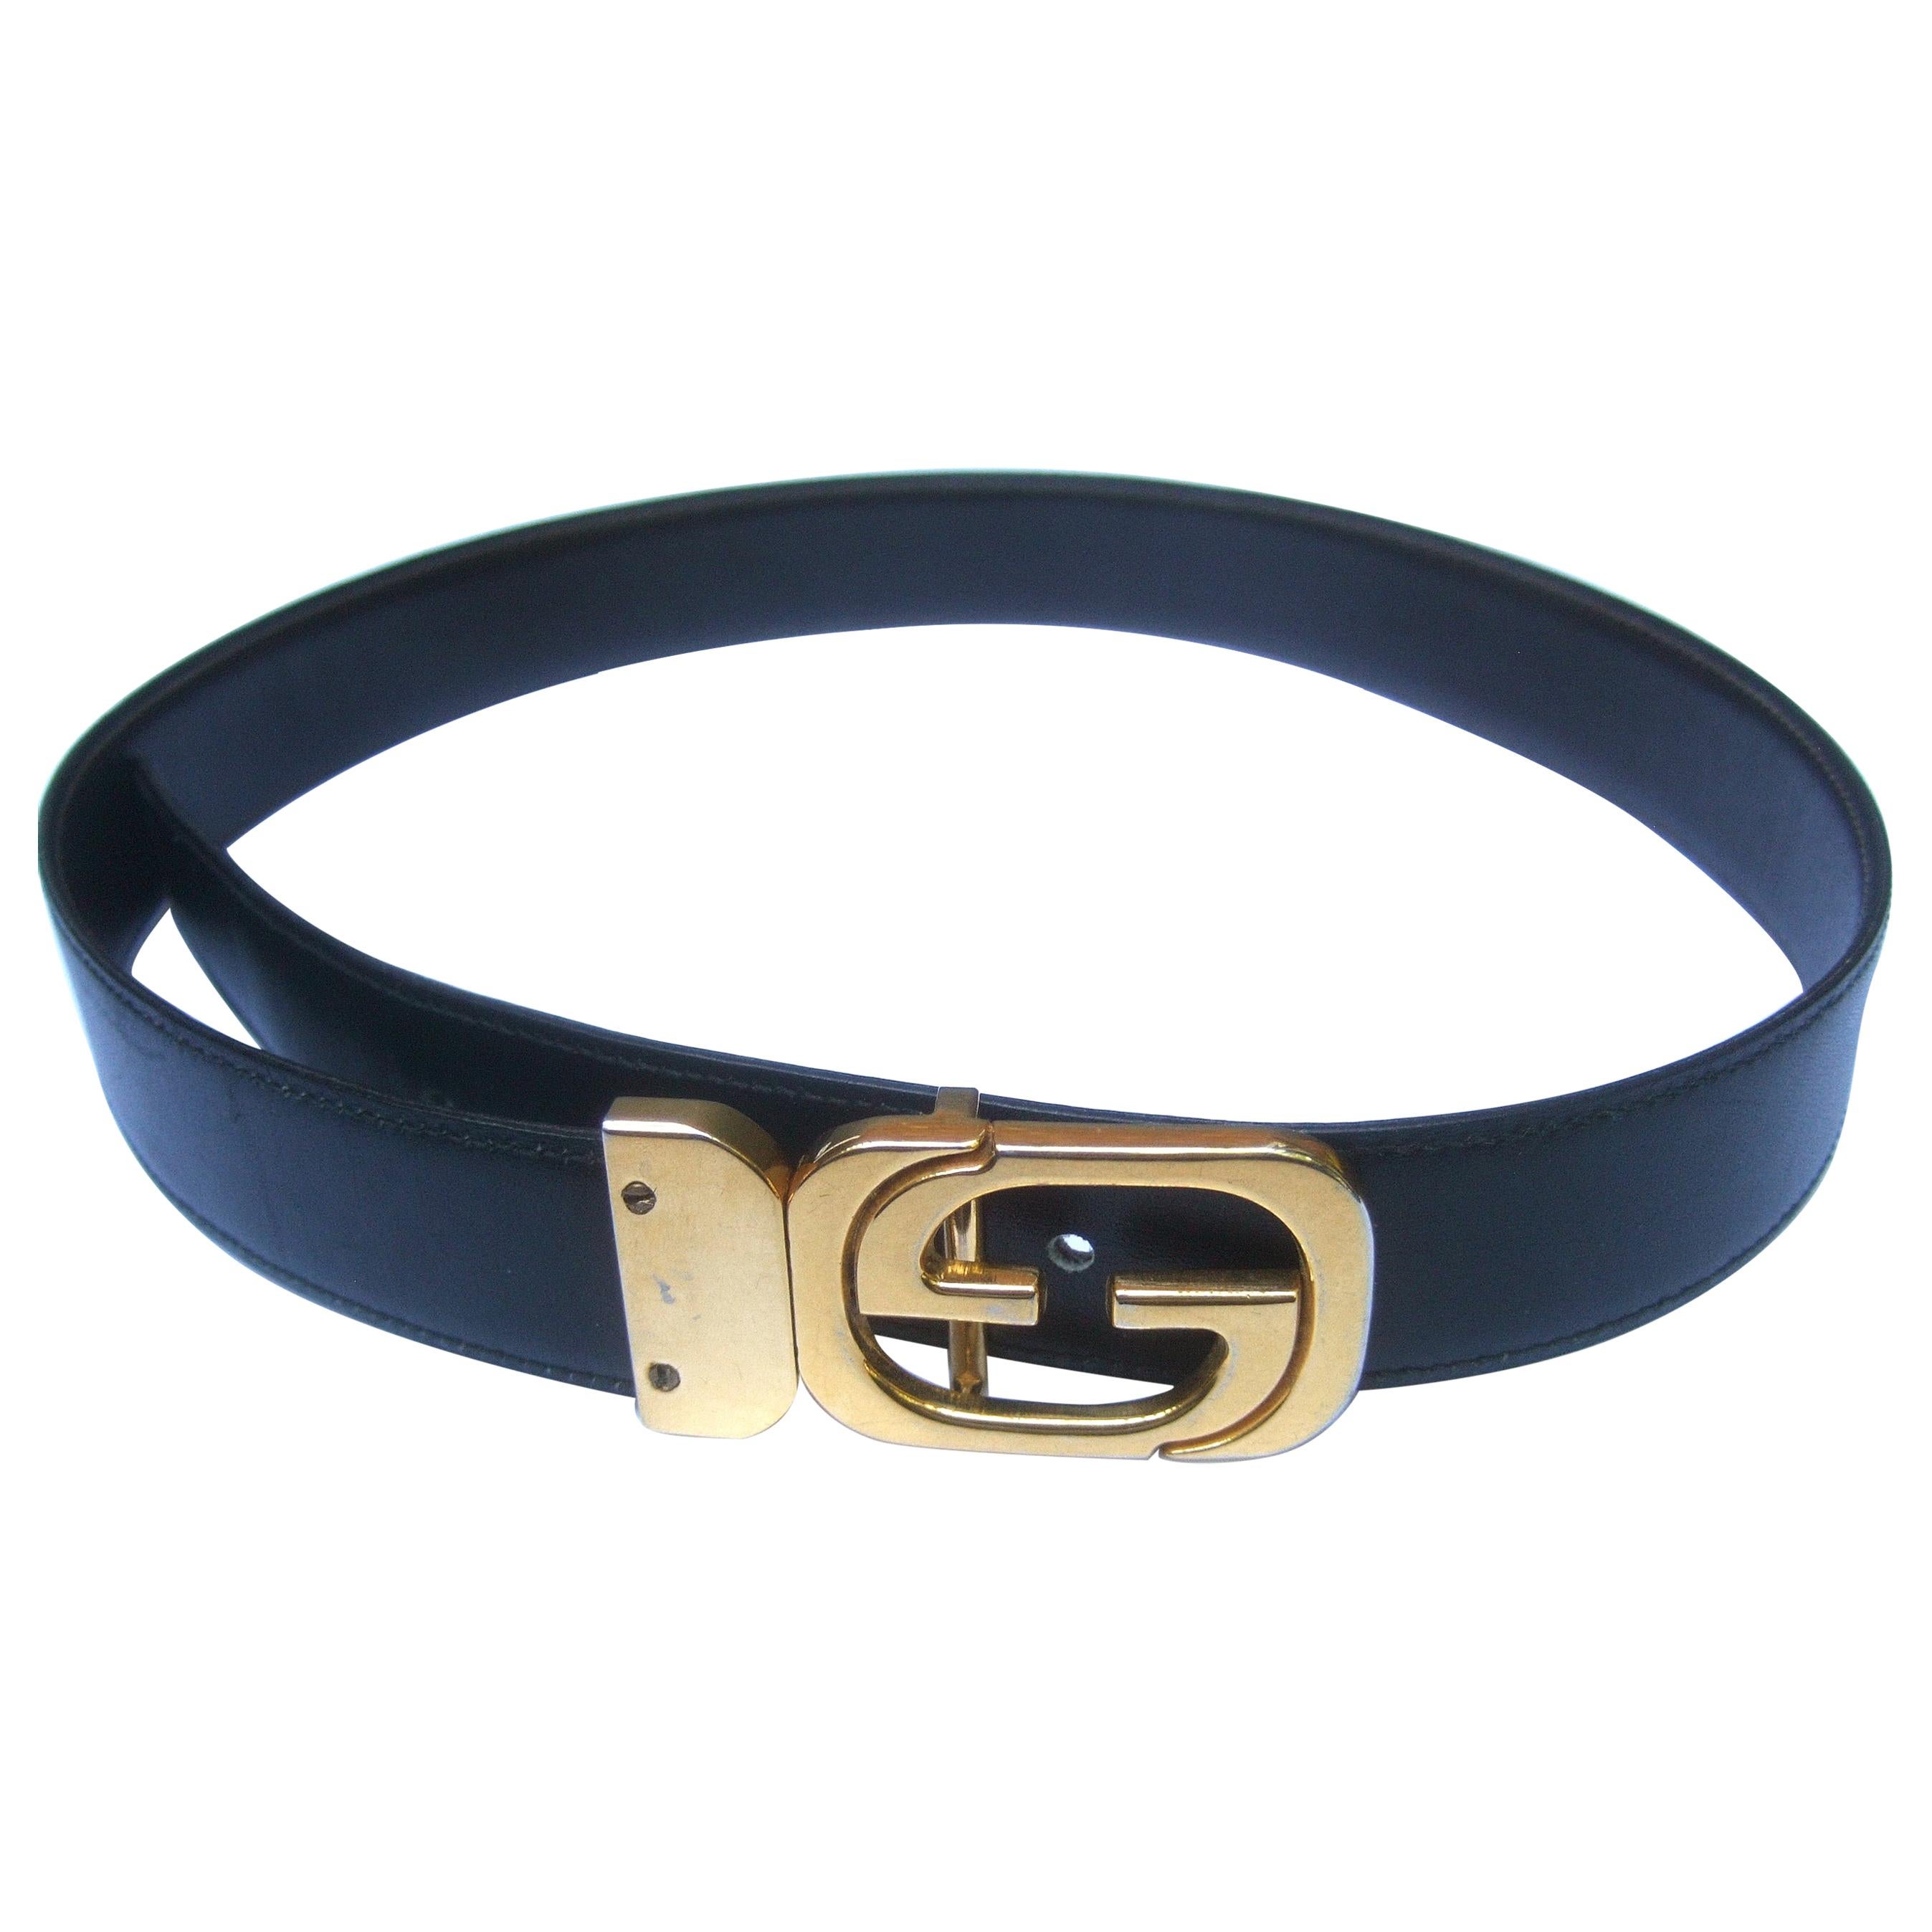 Gucci Italy Black & Brown Reversible Leather Unisex Belt c 1980s